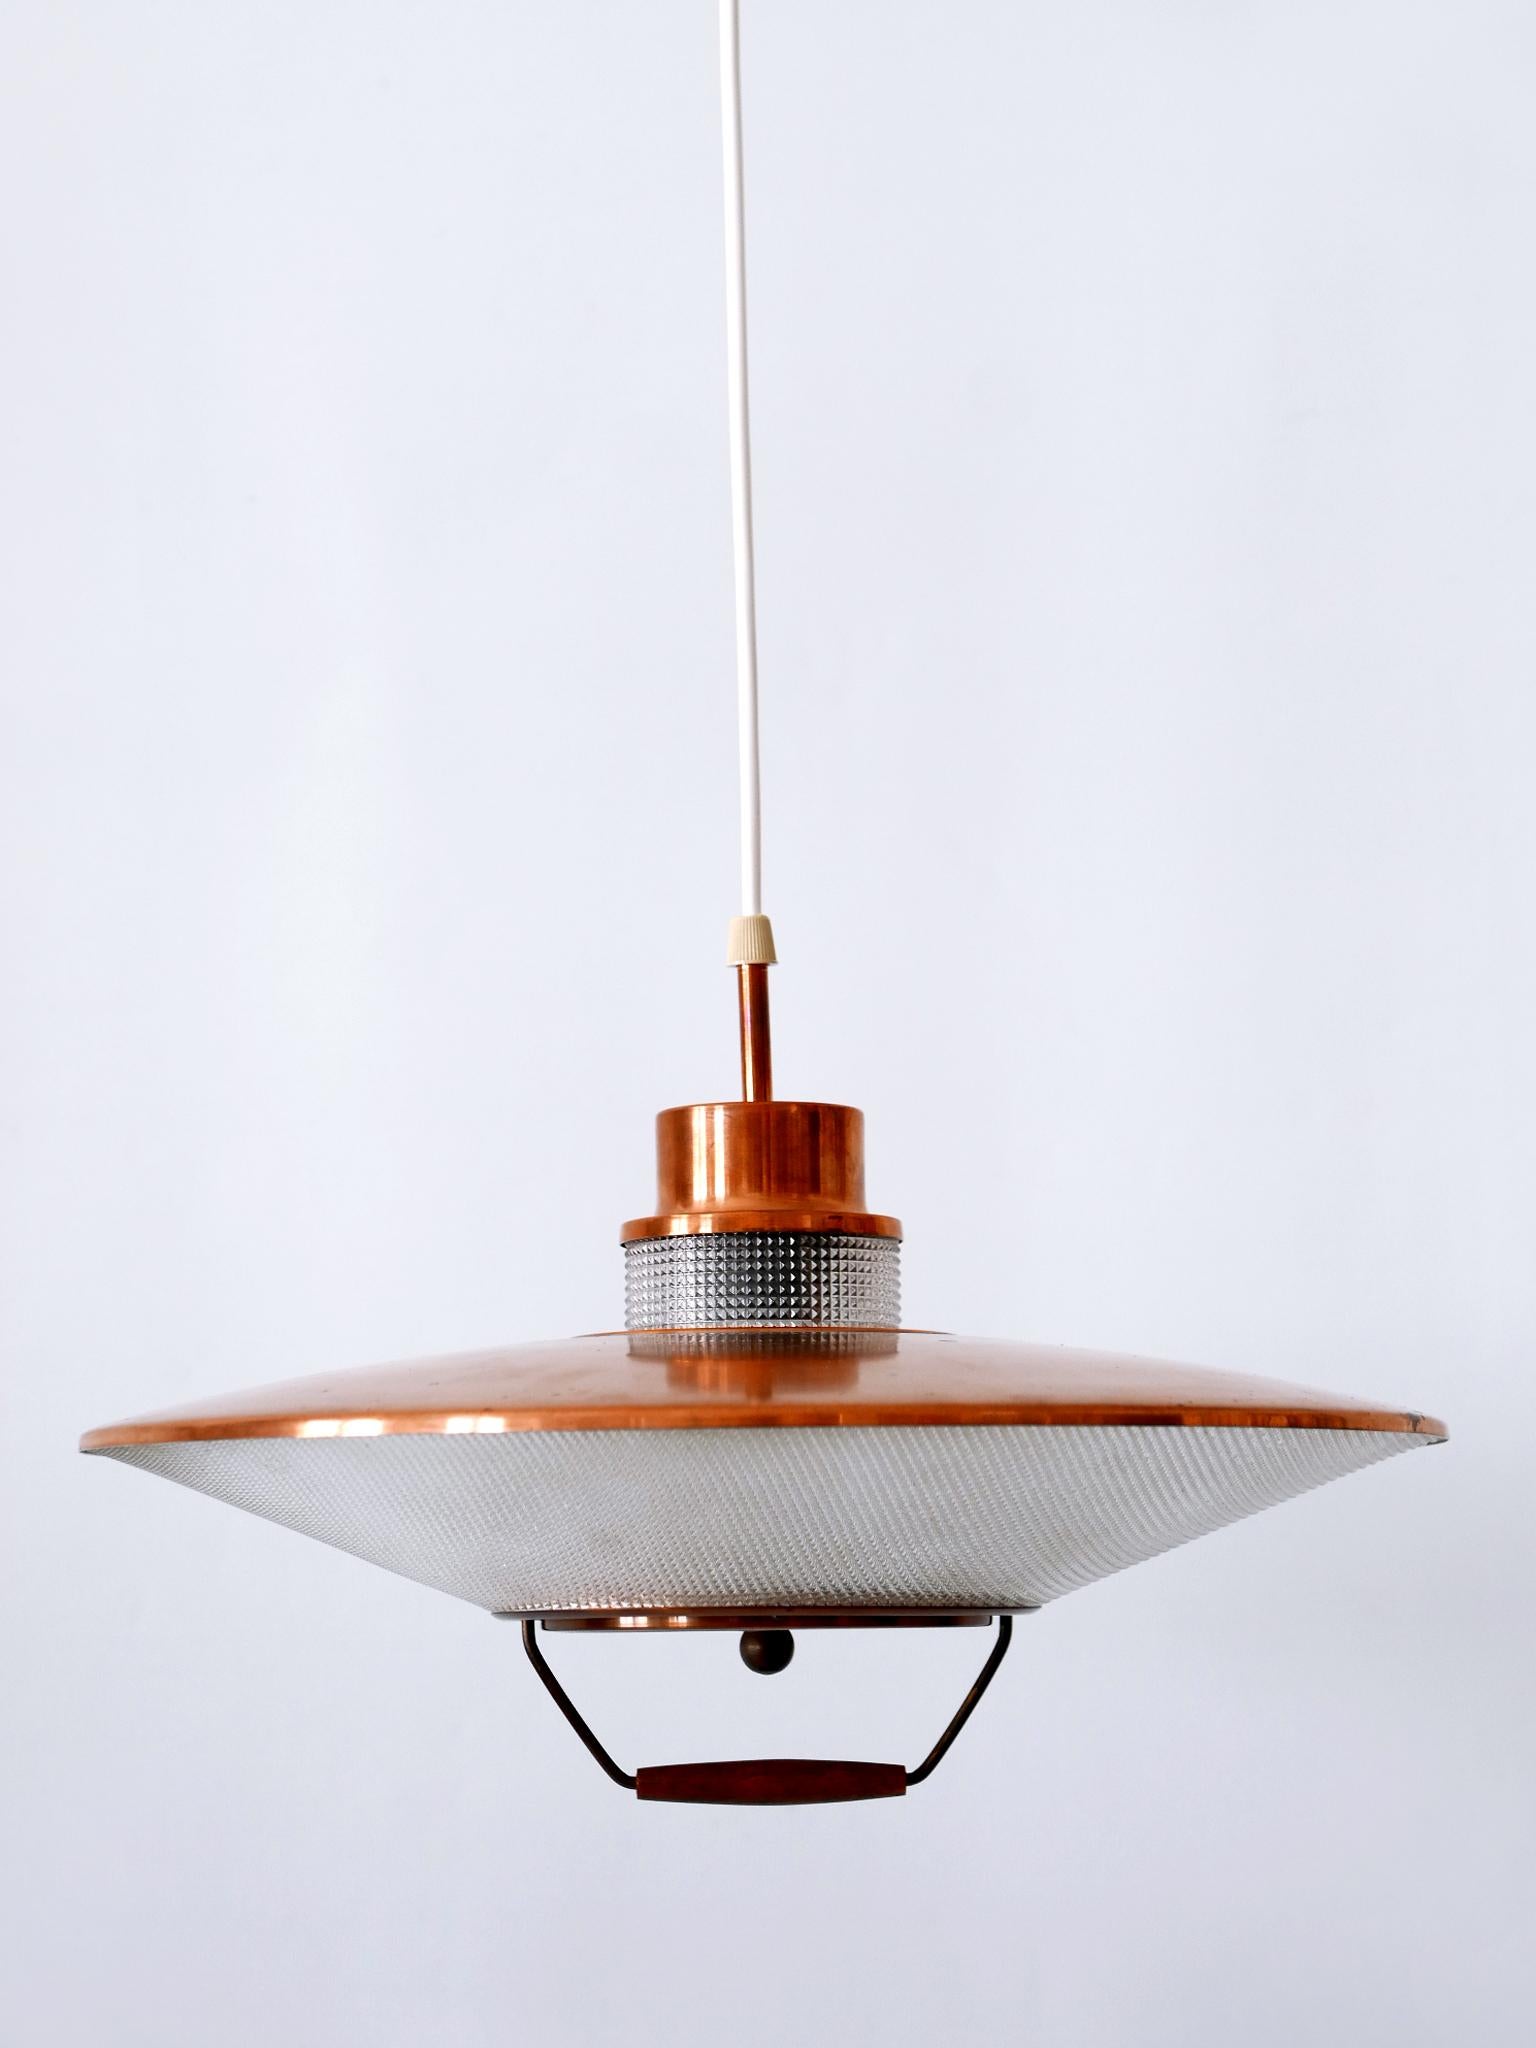 Rare Mid-Century Modern Scandinavian Copper Pendant Lamp or Hanging Light 1960s  In Good Condition For Sale In Munich, DE